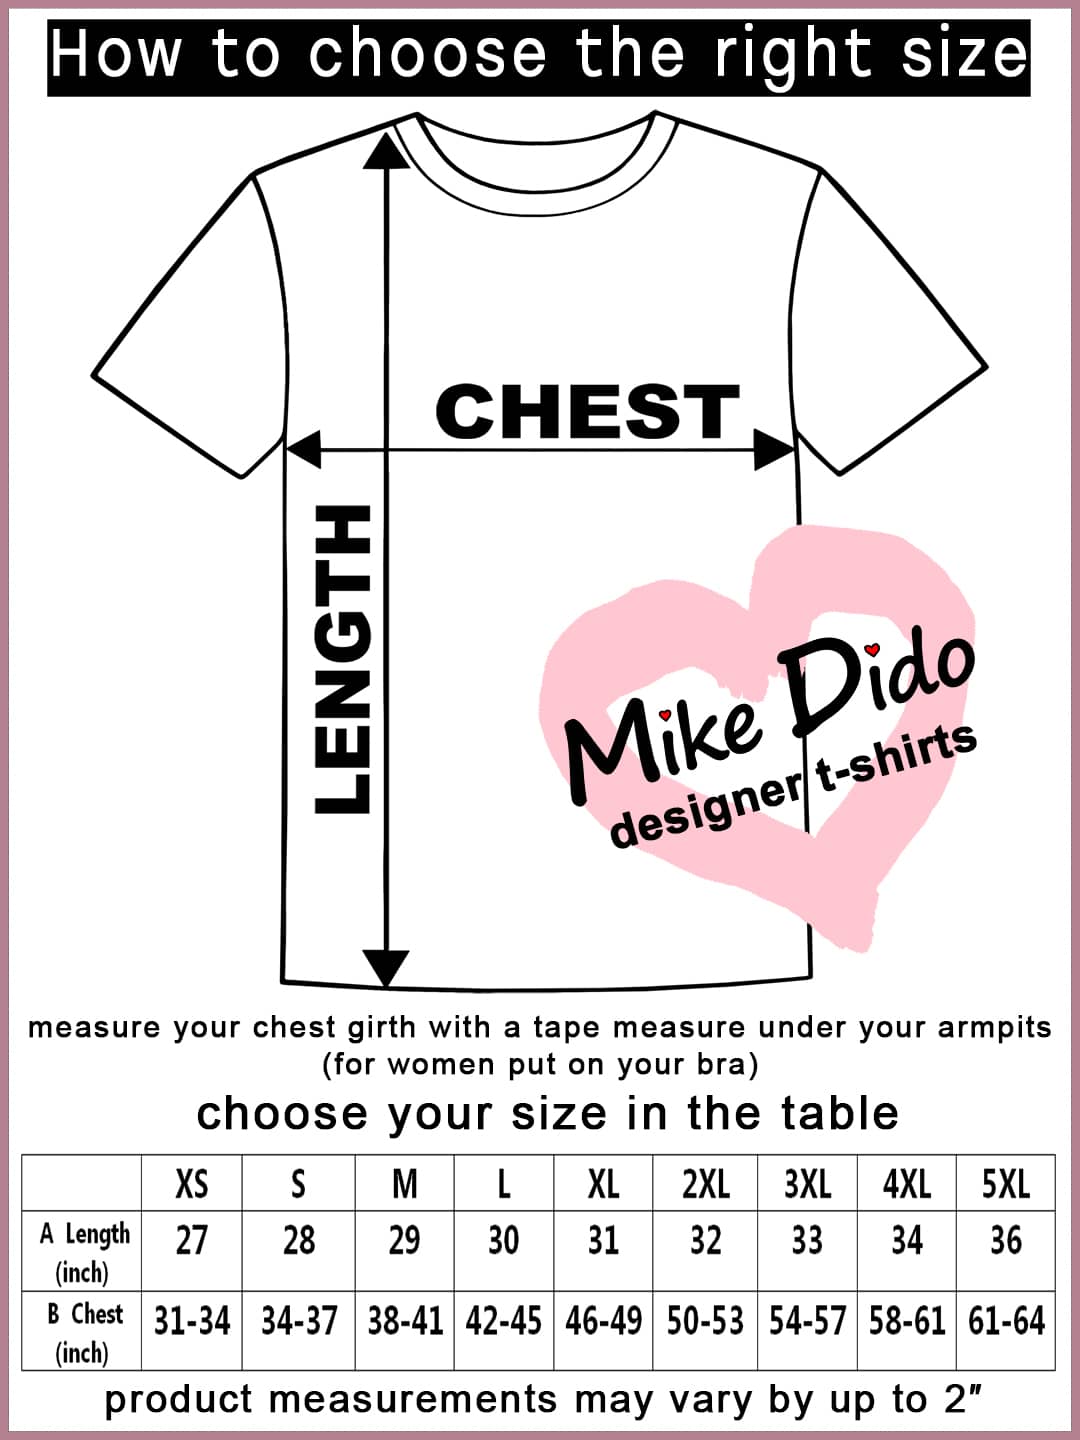 Graphic T-Shirt Beautiful Rose Love Quote by Mike Dido